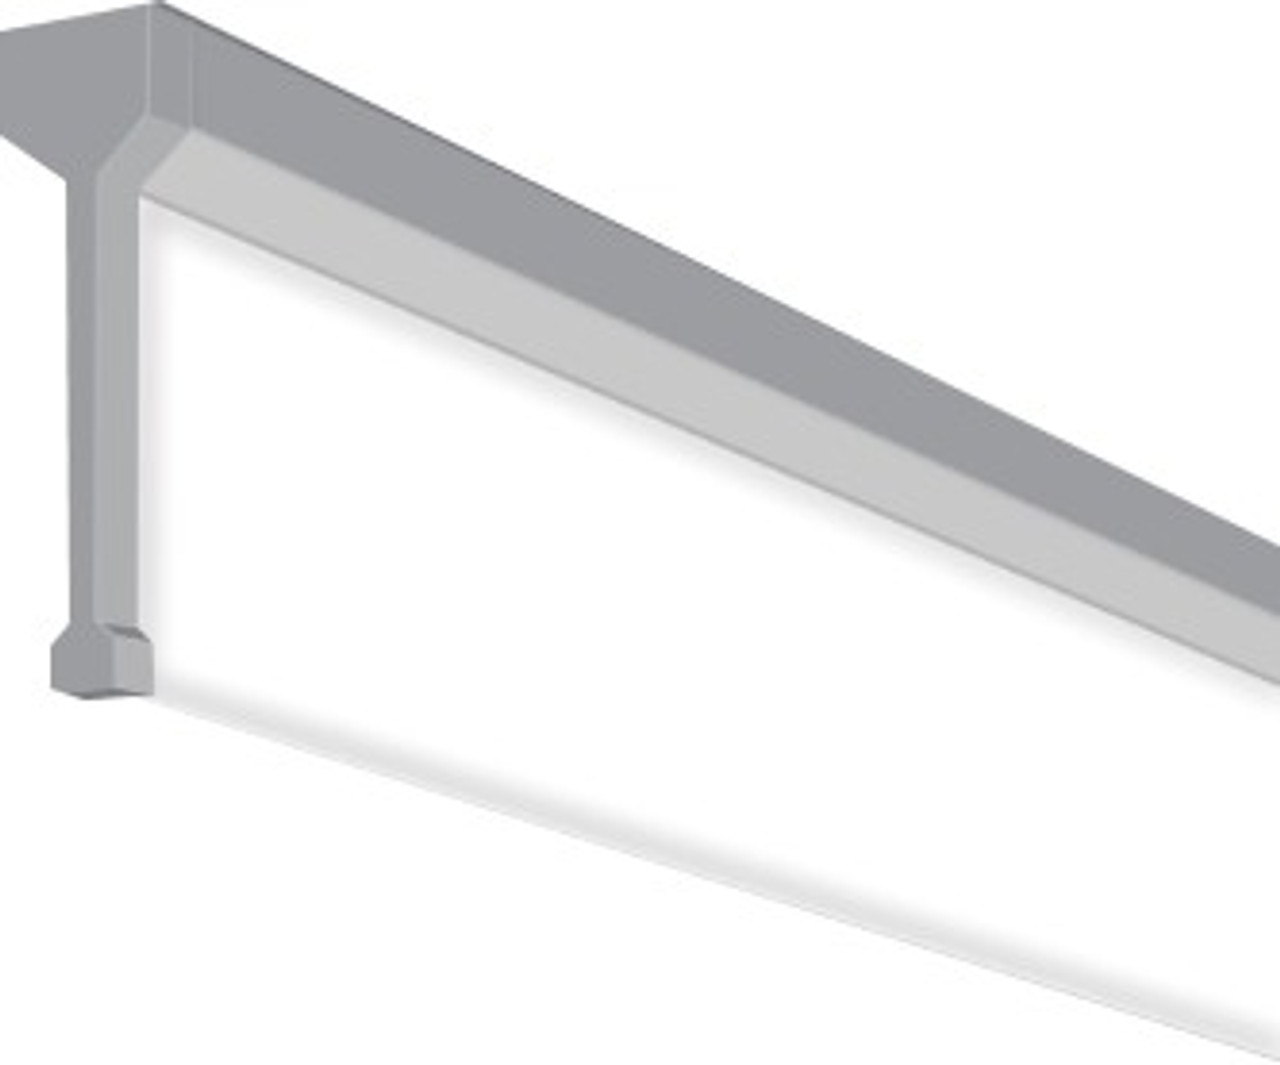 The Linear Surface is attractive and easy to install with simple screws or threaded studs which pass through the housing to fasten the luminaire in place. Ideal for locations with low ceilings or where fire ratings prevent recessed luminaires.  It is integrated with ultra-thin semi-transparent vertical optics, enveloped in a signature sloping silhouette where the frame meets the  optics. It enables designers to mount the luminaire on ceilings to enhance architectural styling or add a unique flair to the interior design  of a space.  With wattage and CCT adjustable function, Meta Surface also has the flexibility to illuminate many types of spaces, packing a powerful punch of up to 1300 lumens per foot with 90+CRI.